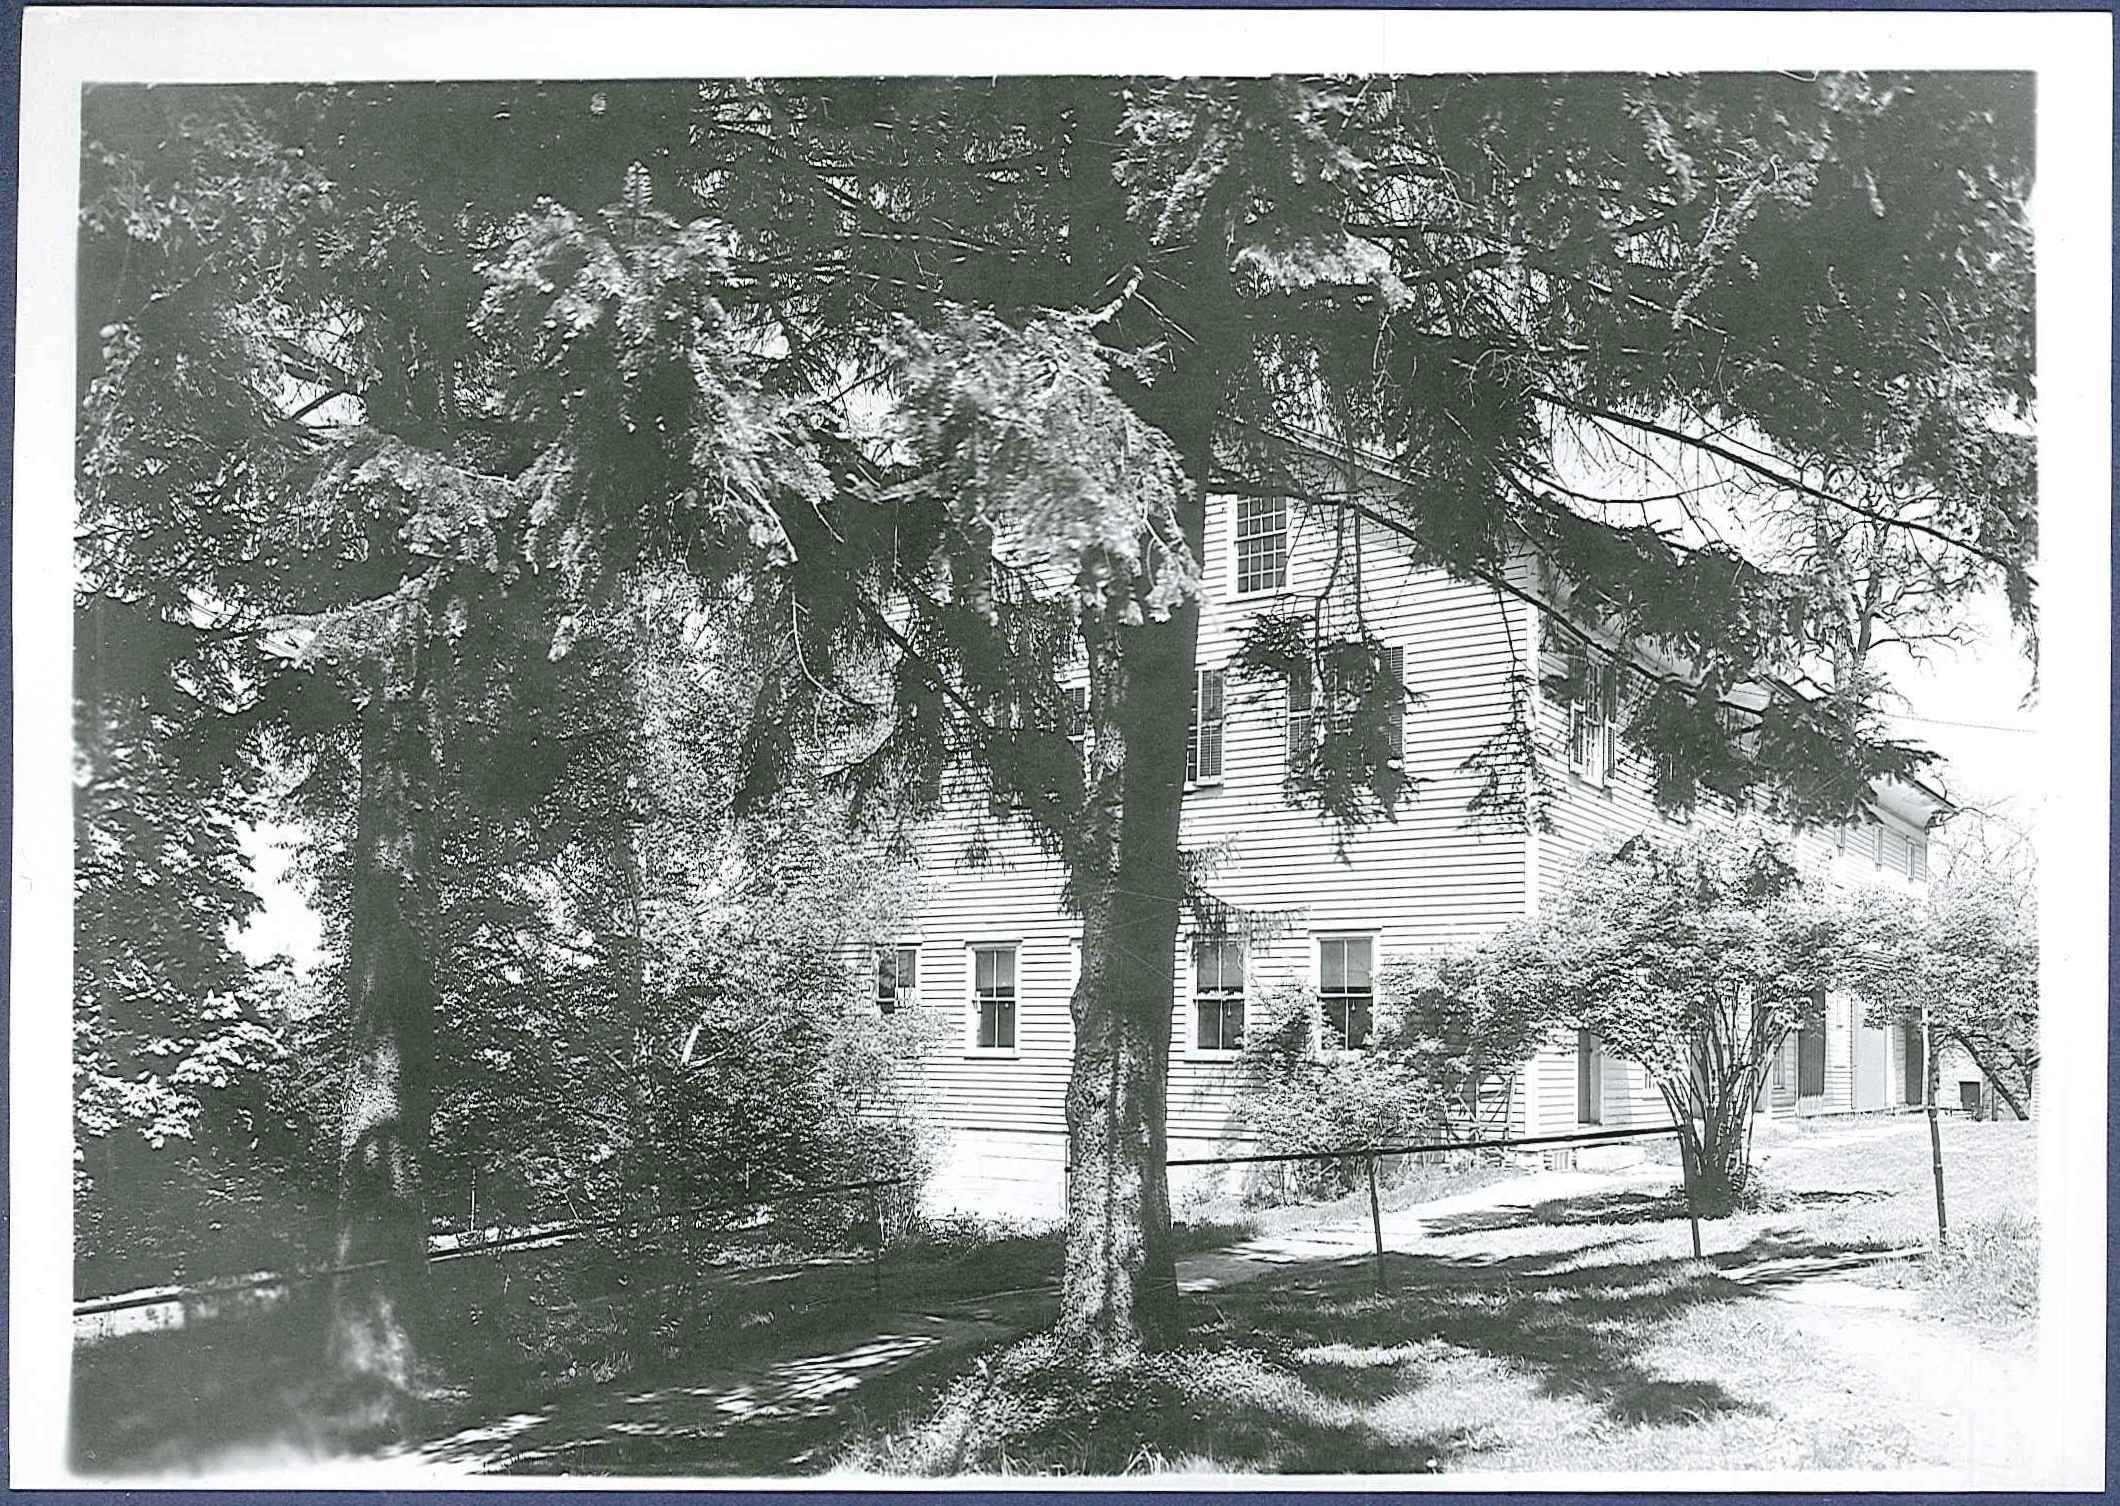 A black and white photo of a house with trees.